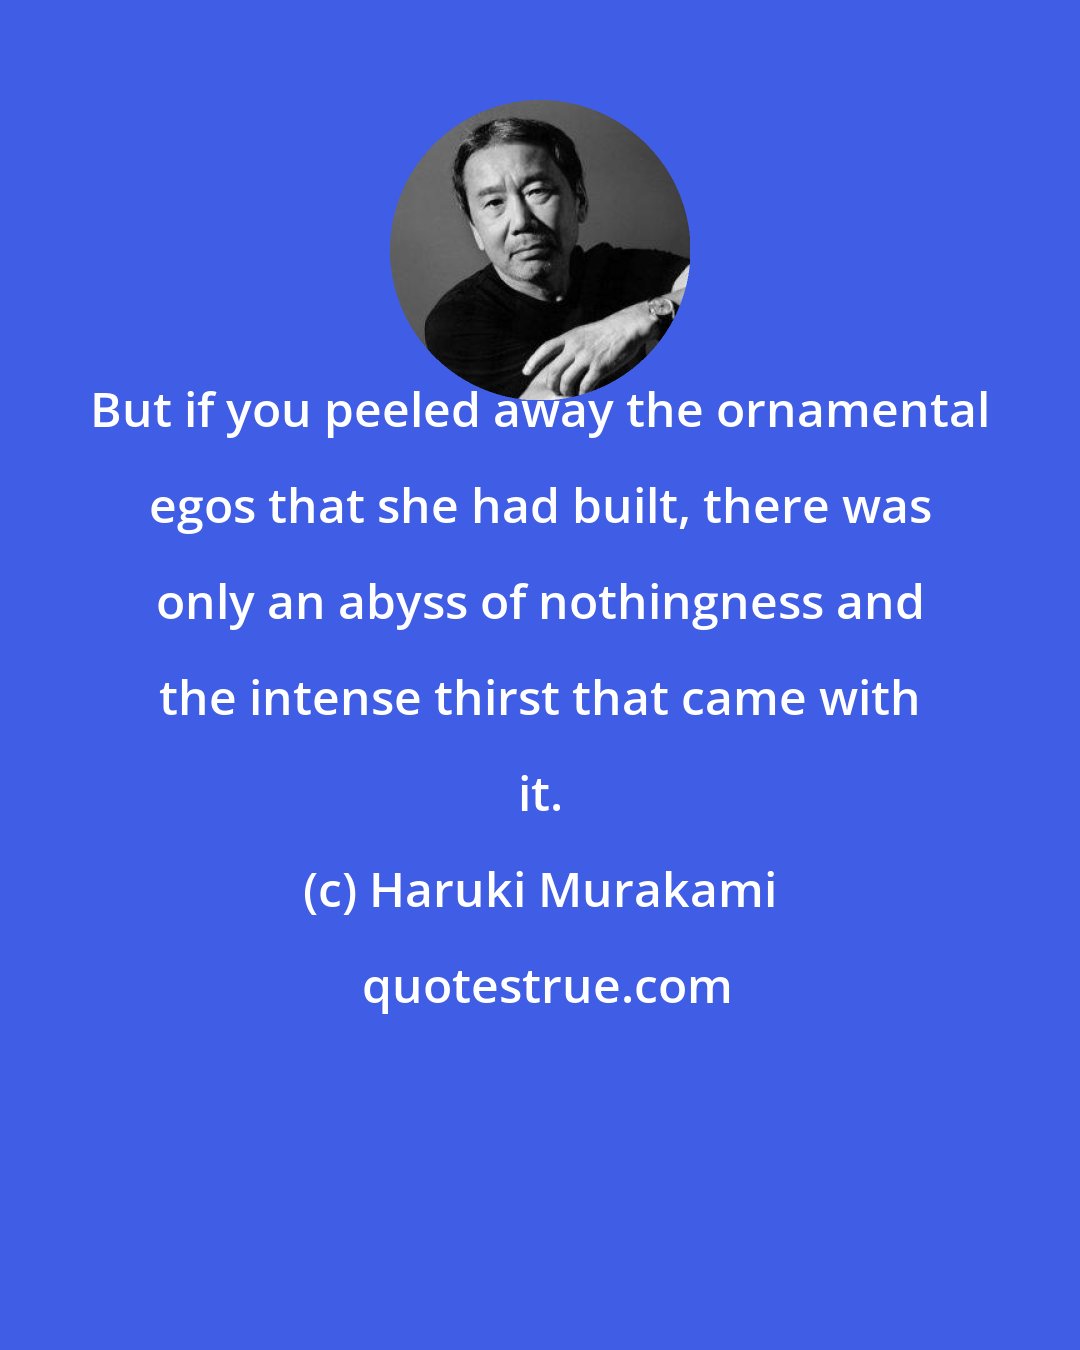 Haruki Murakami: But if you peeled away the ornamental egos that she had built, there was only an abyss of nothingness and the intense thirst that came with it.